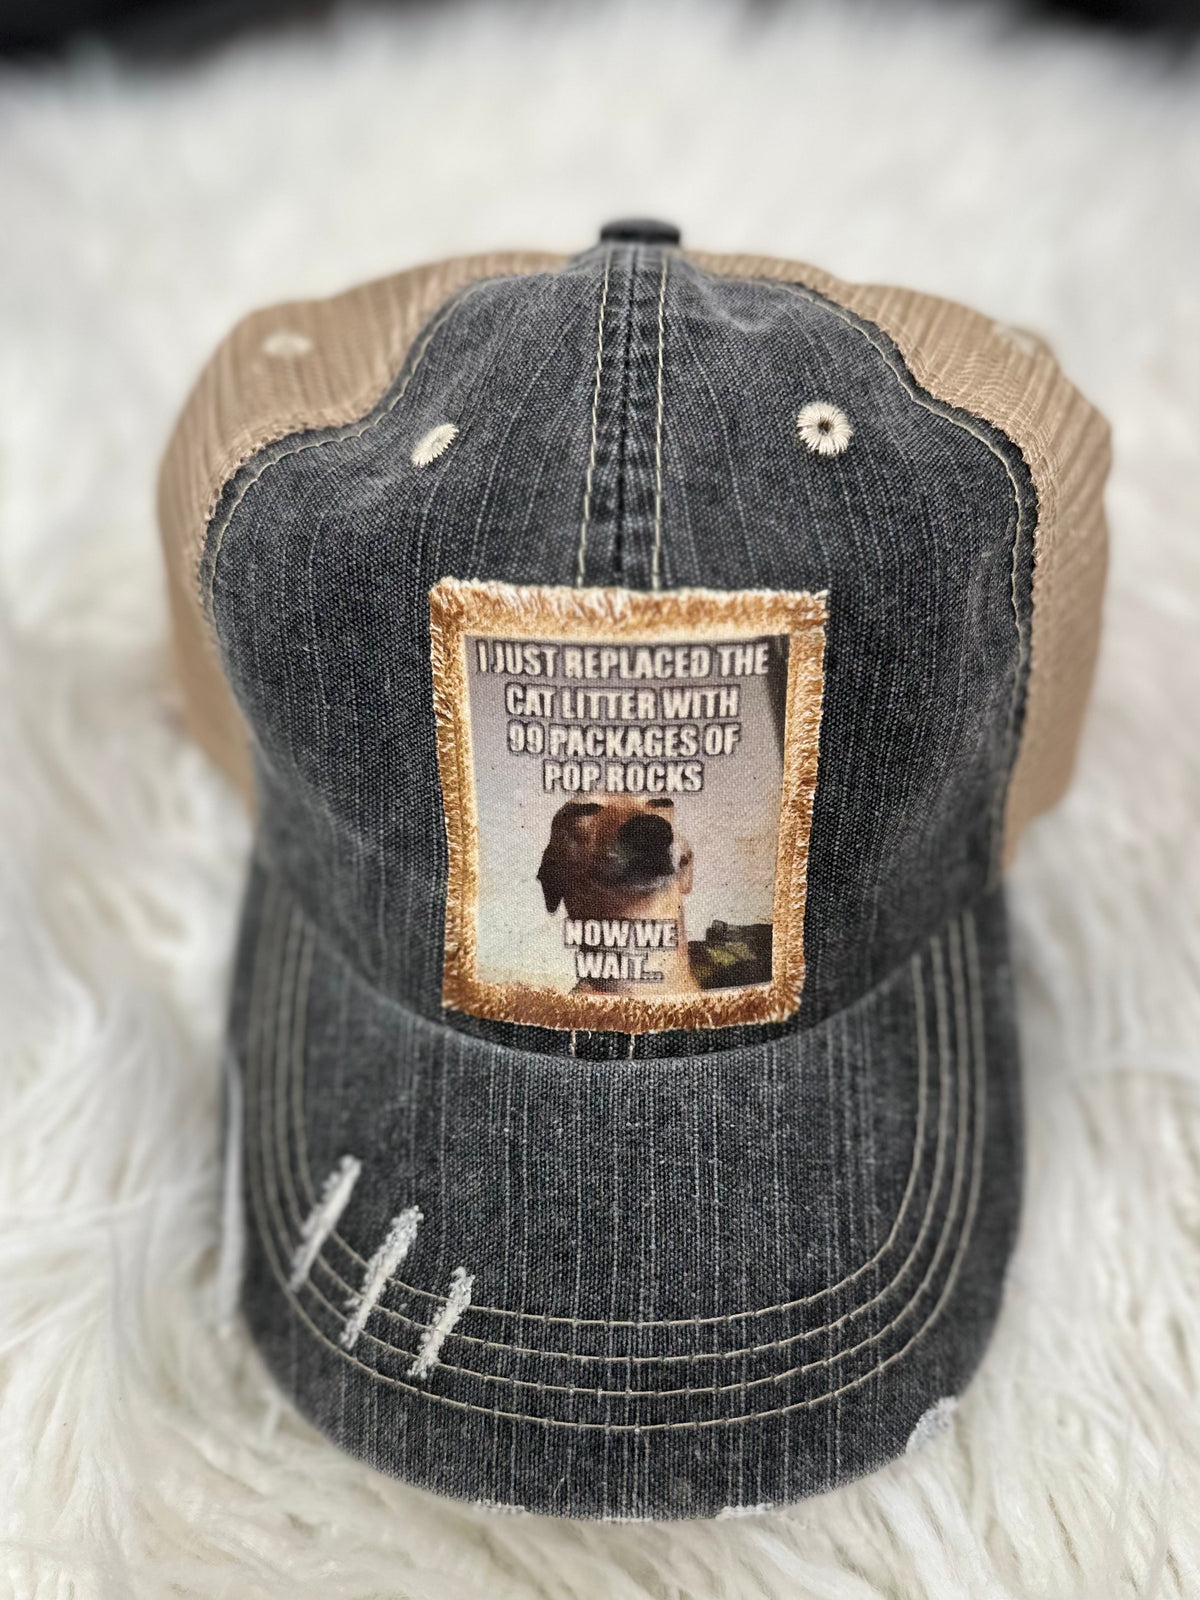 "I Just Replaced The Cat Litter" Trucker Hat